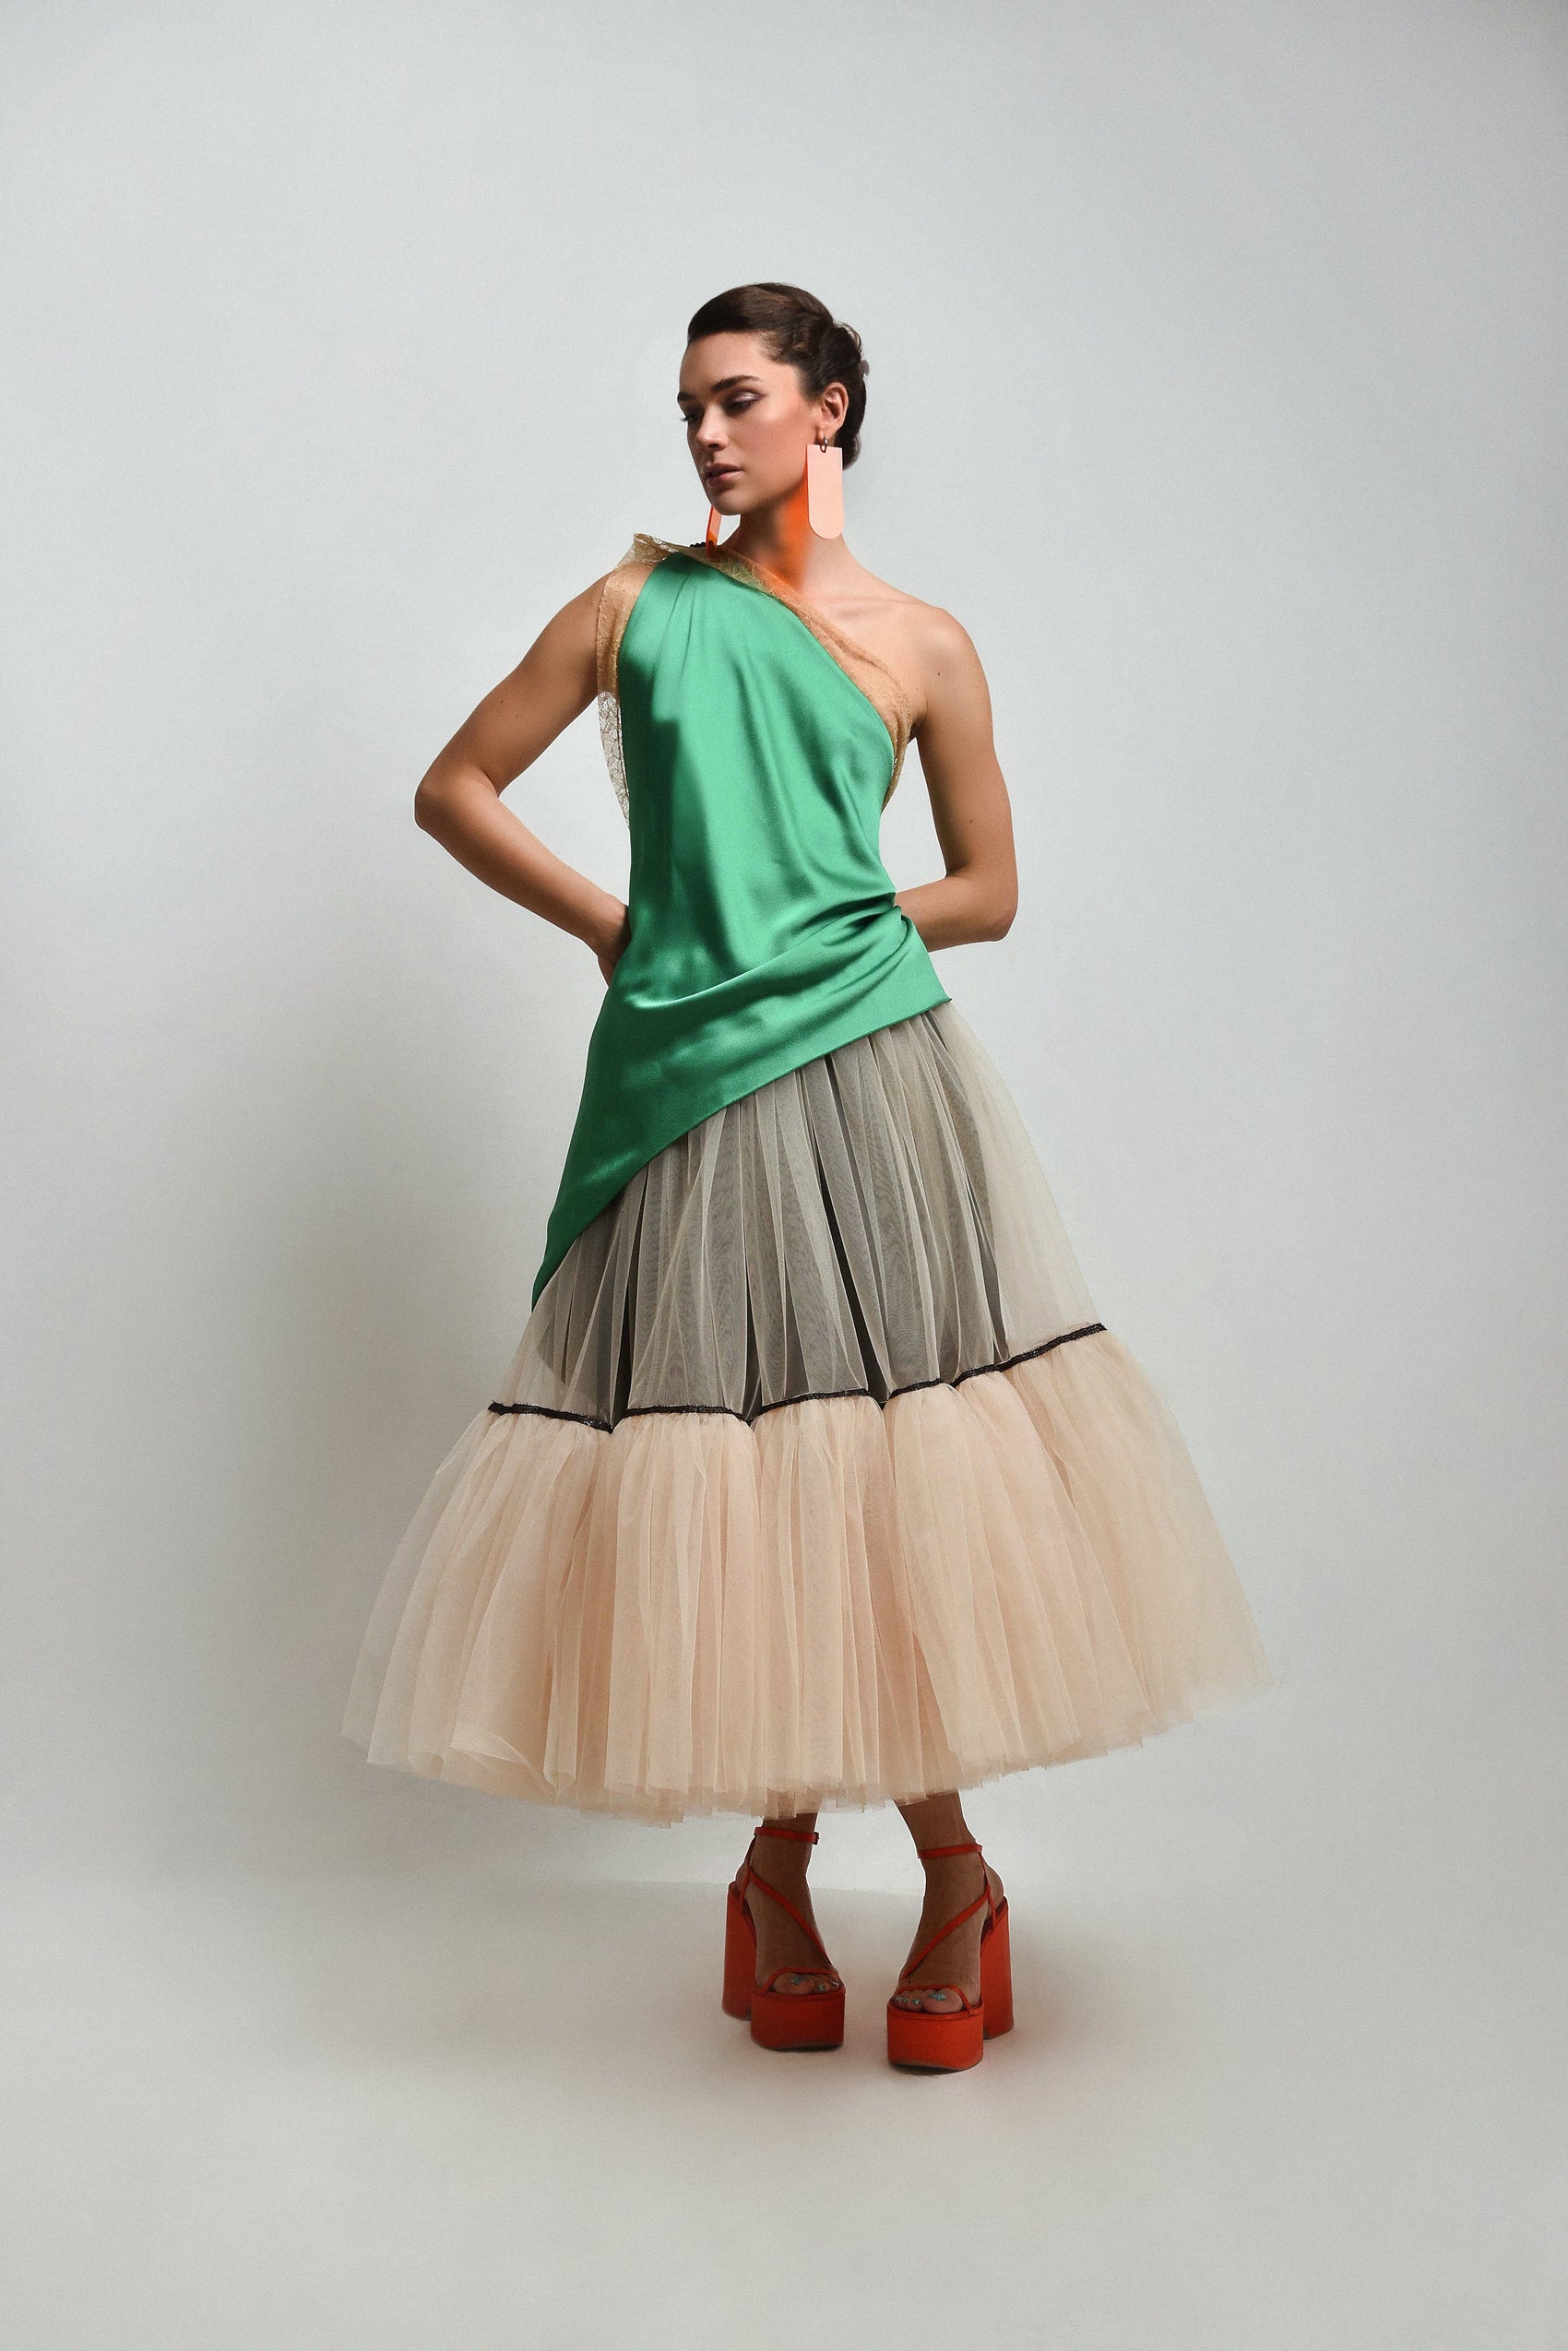 Green halter top with lace on the edges and a layered tulle skirt